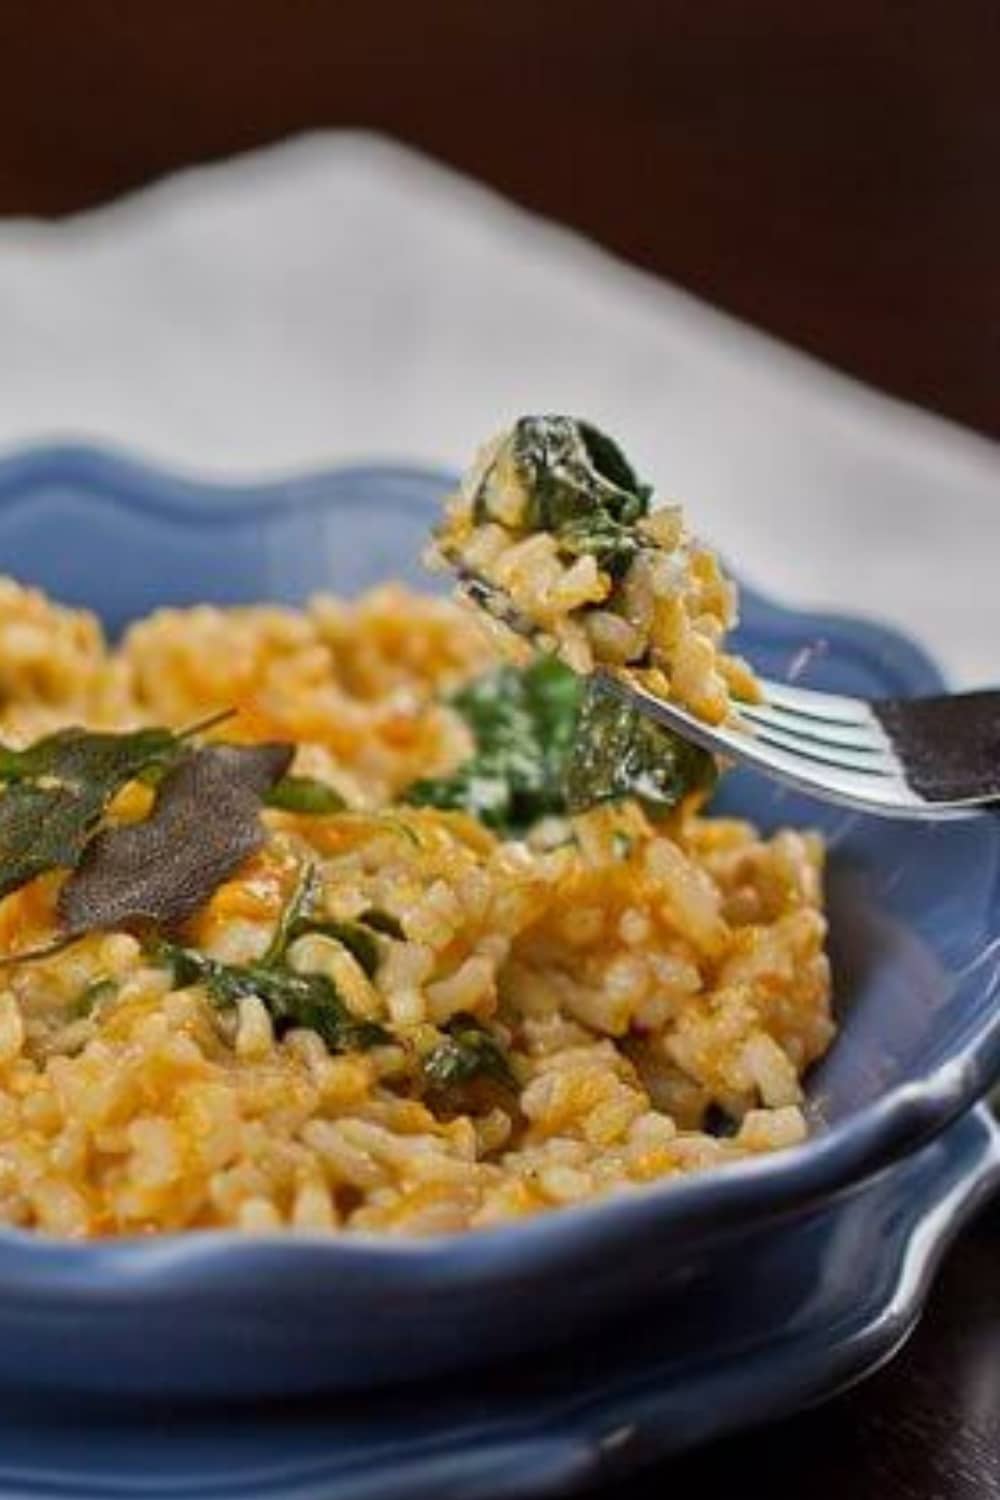 Pumpkin and Baby Spinach Risotto